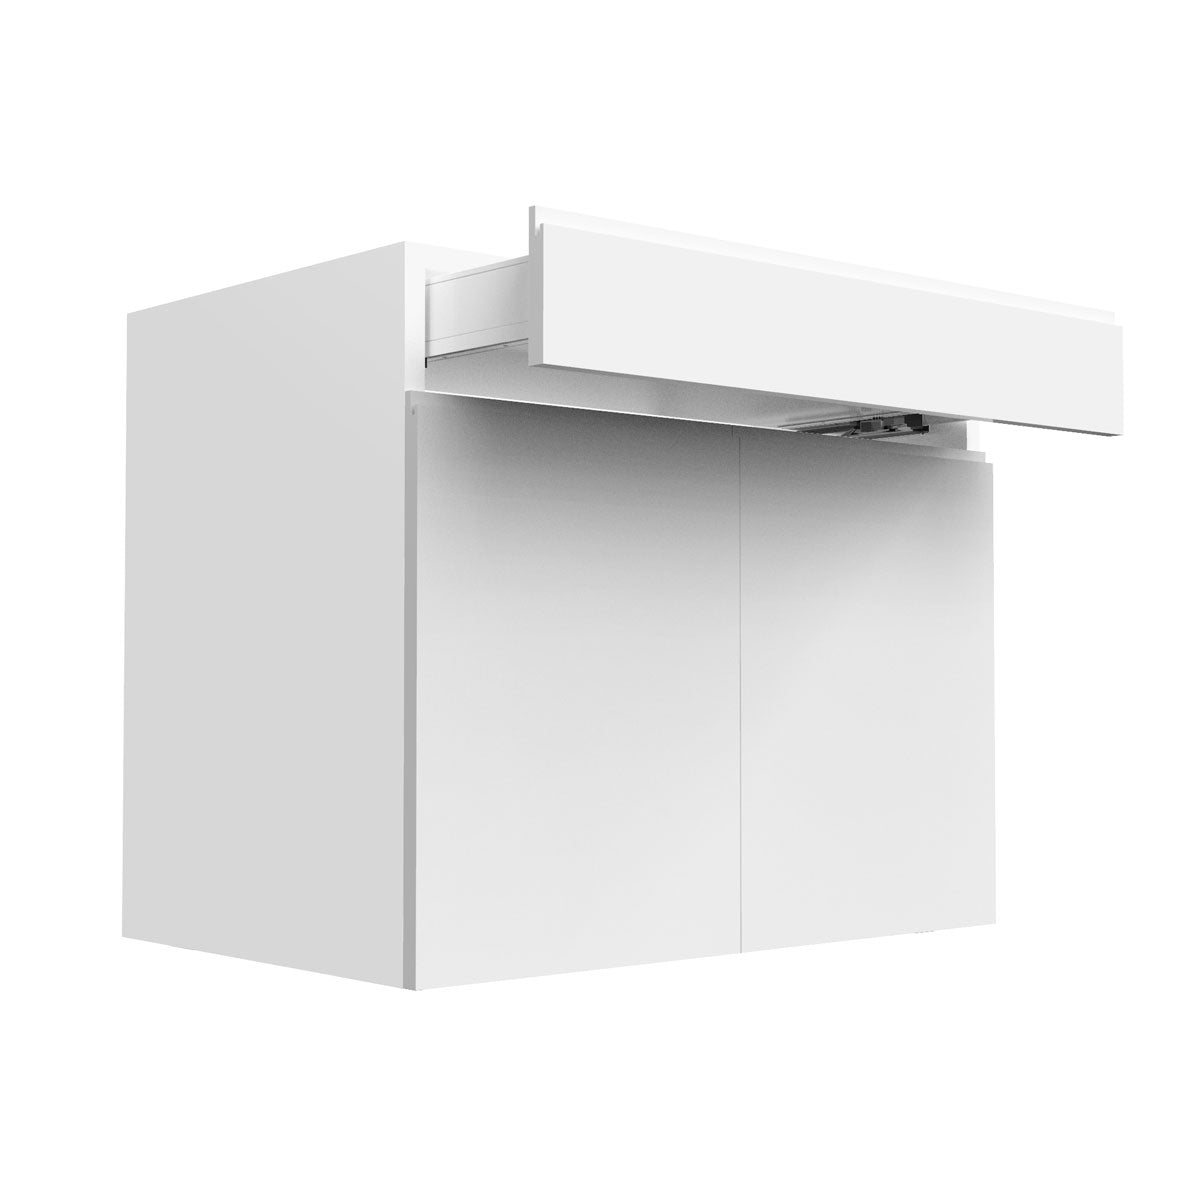 RTA - White Kitchen Cabinet - Lacquer White - Double Door Base Cabinet | 36"W x 34.5"H x 23.8"D